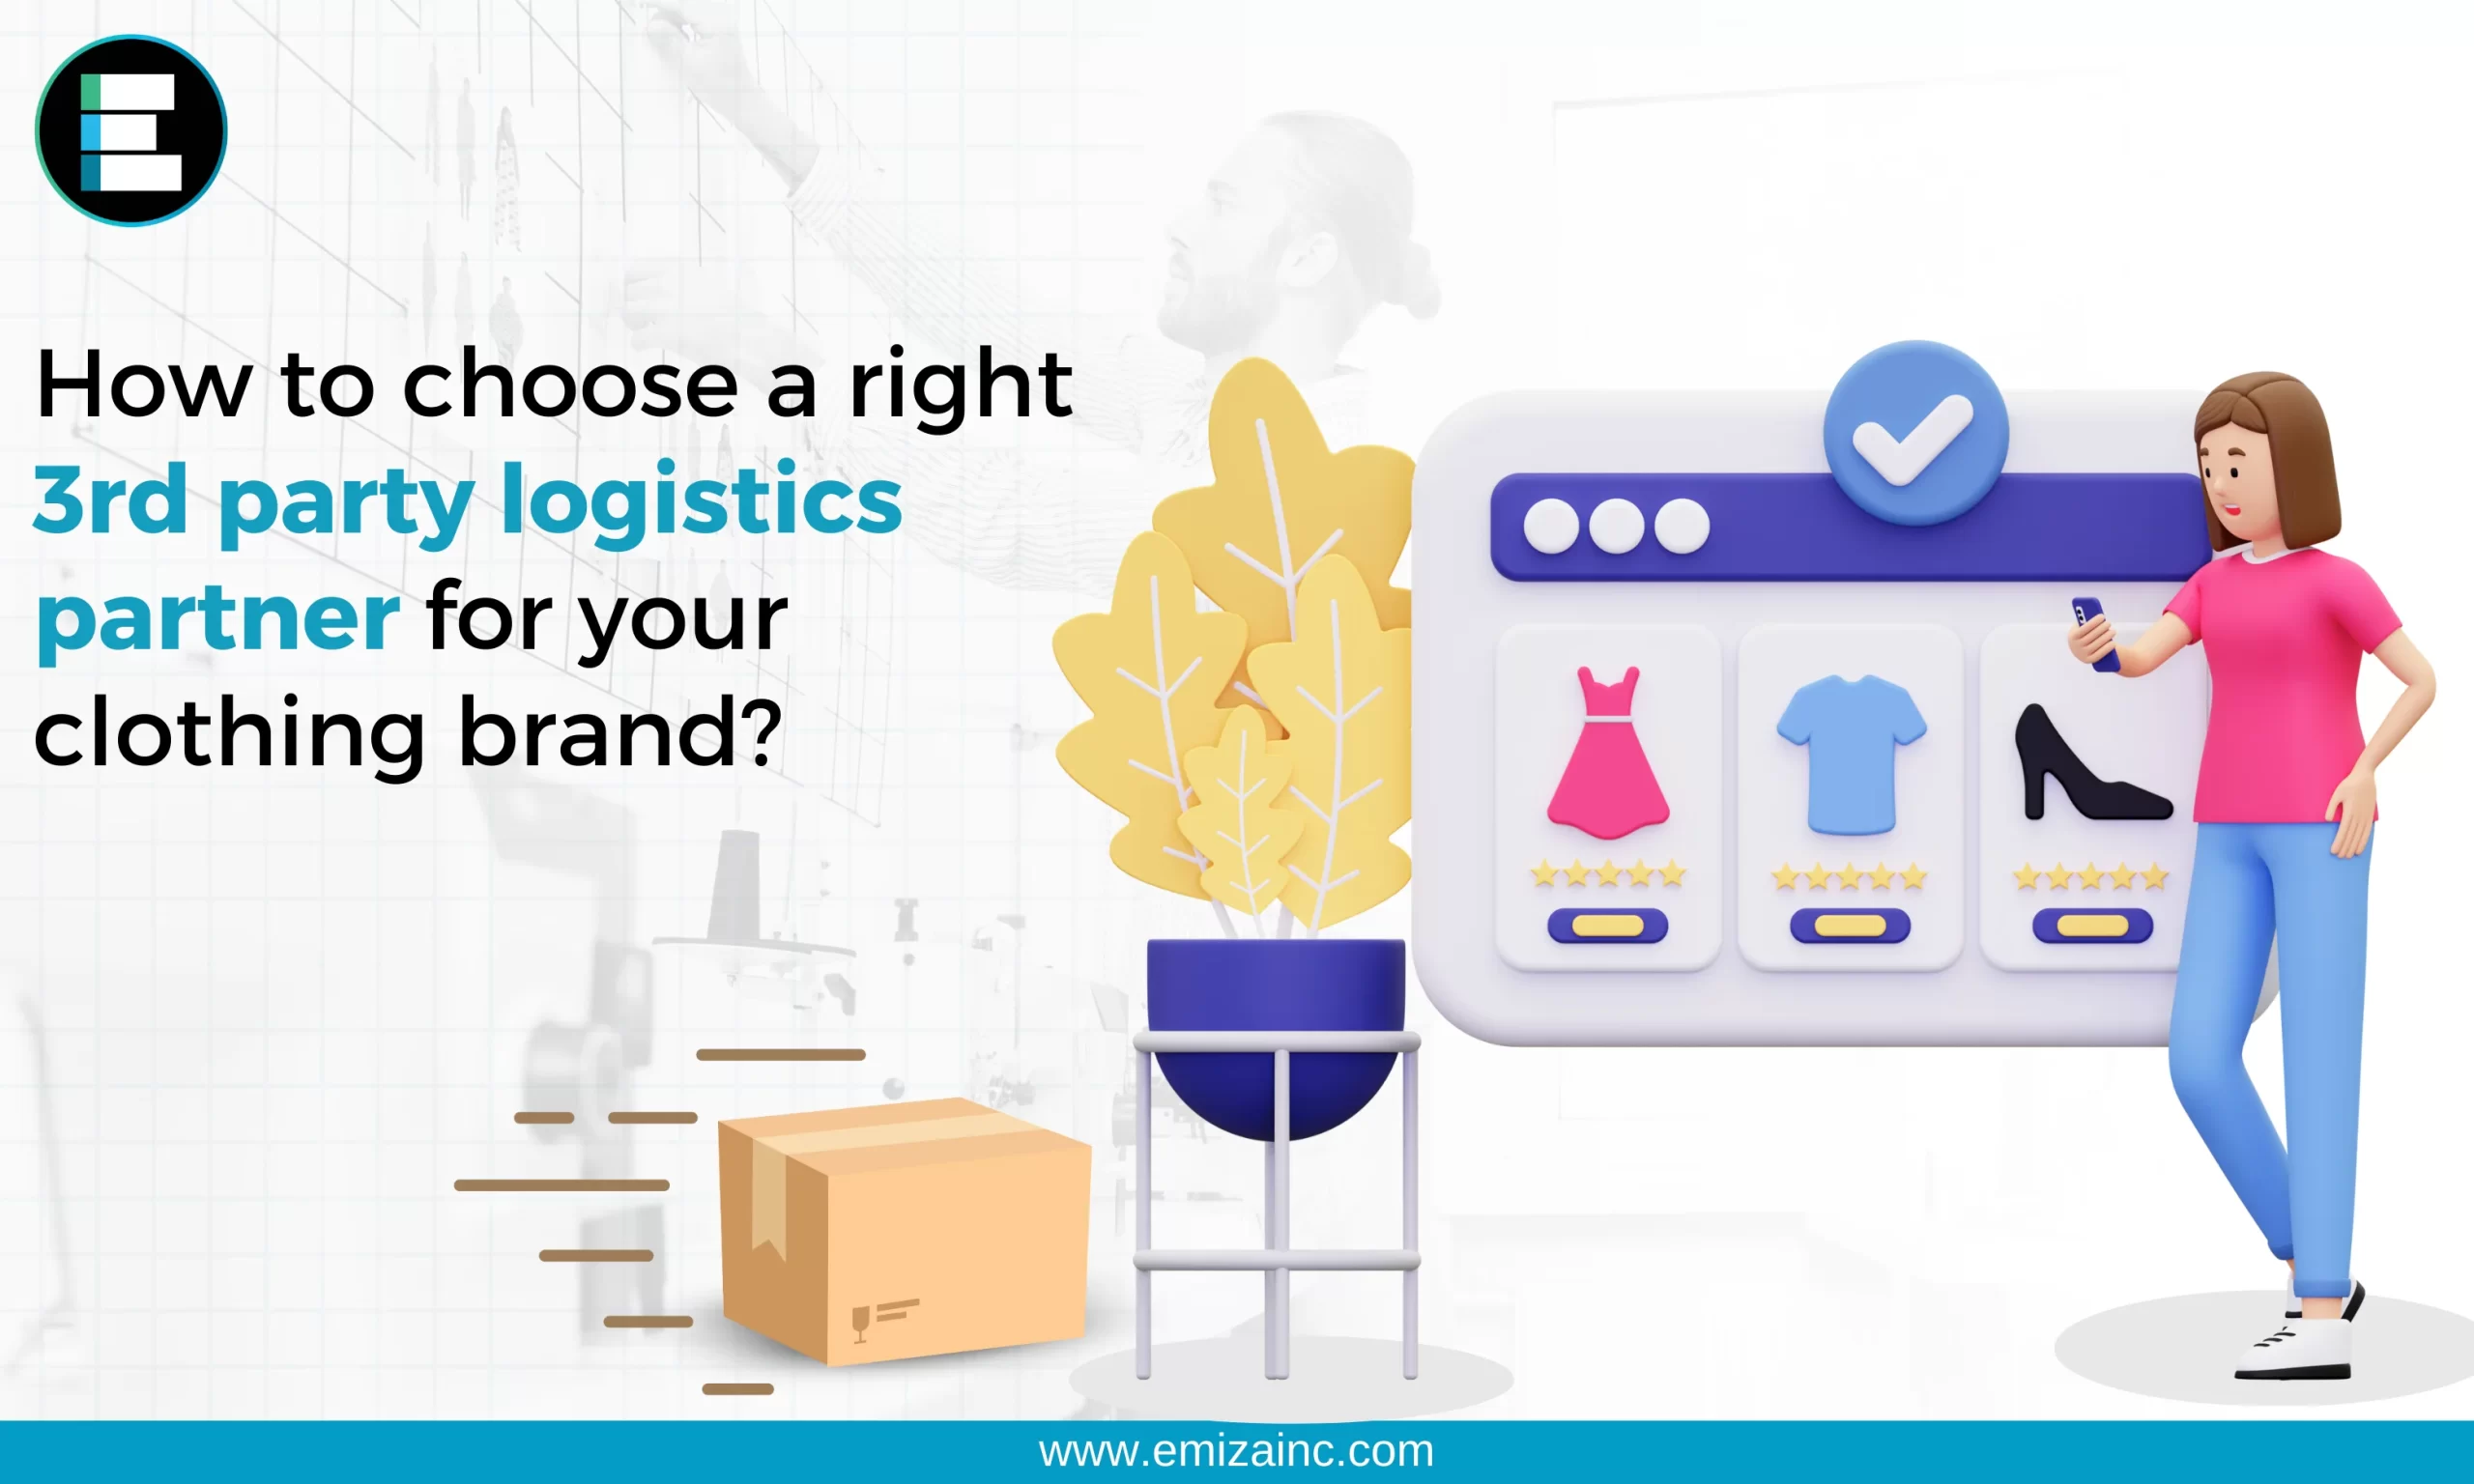 How to choose the right 3rd party logistics partner for your clothing brand